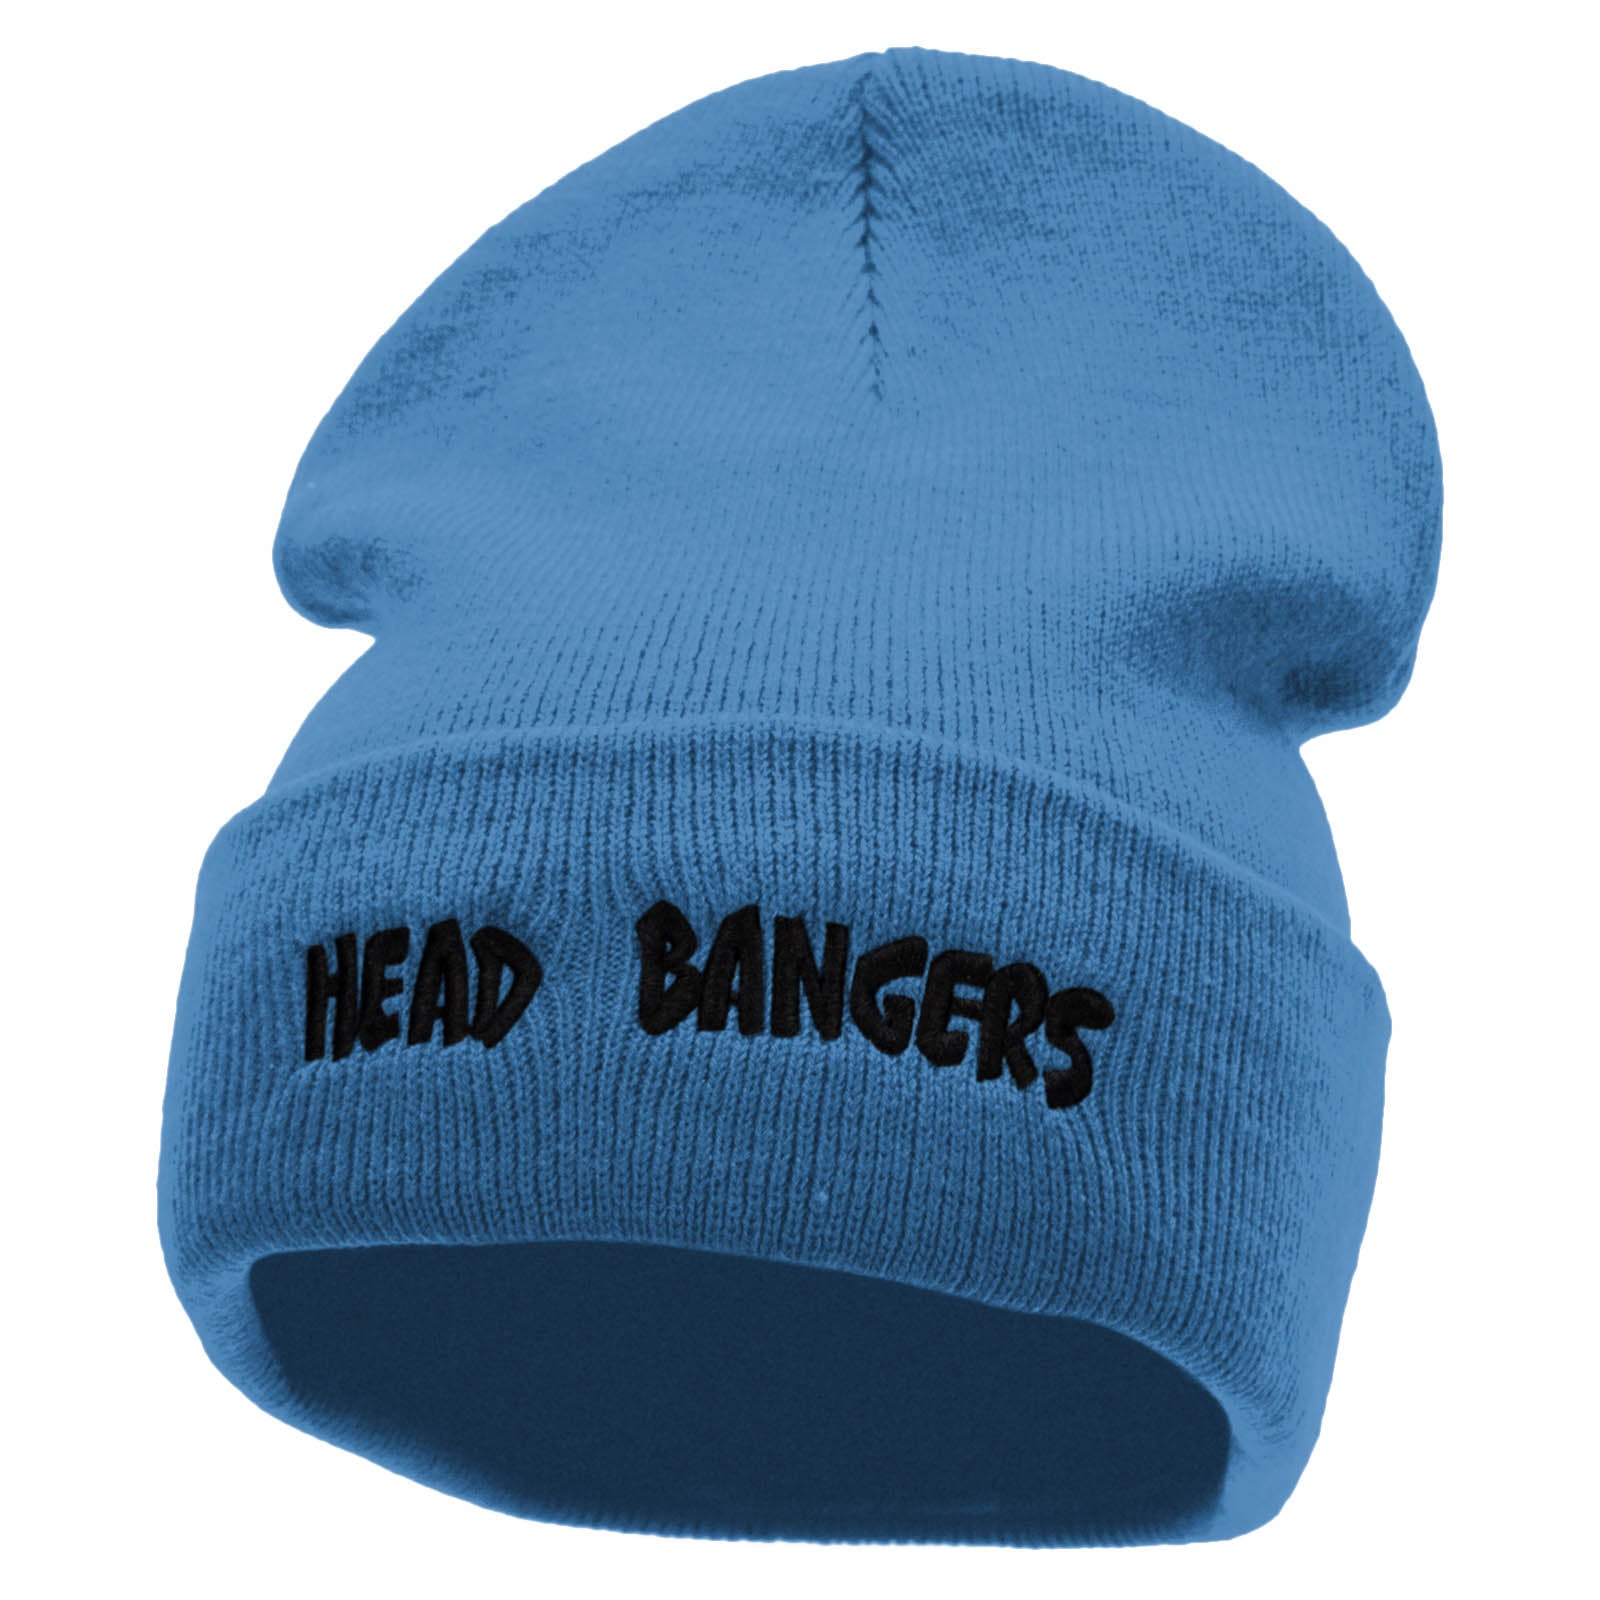 Head Bangers Embroidered 12 Inch Long Knitted Beanie - Sky Blue OSFM